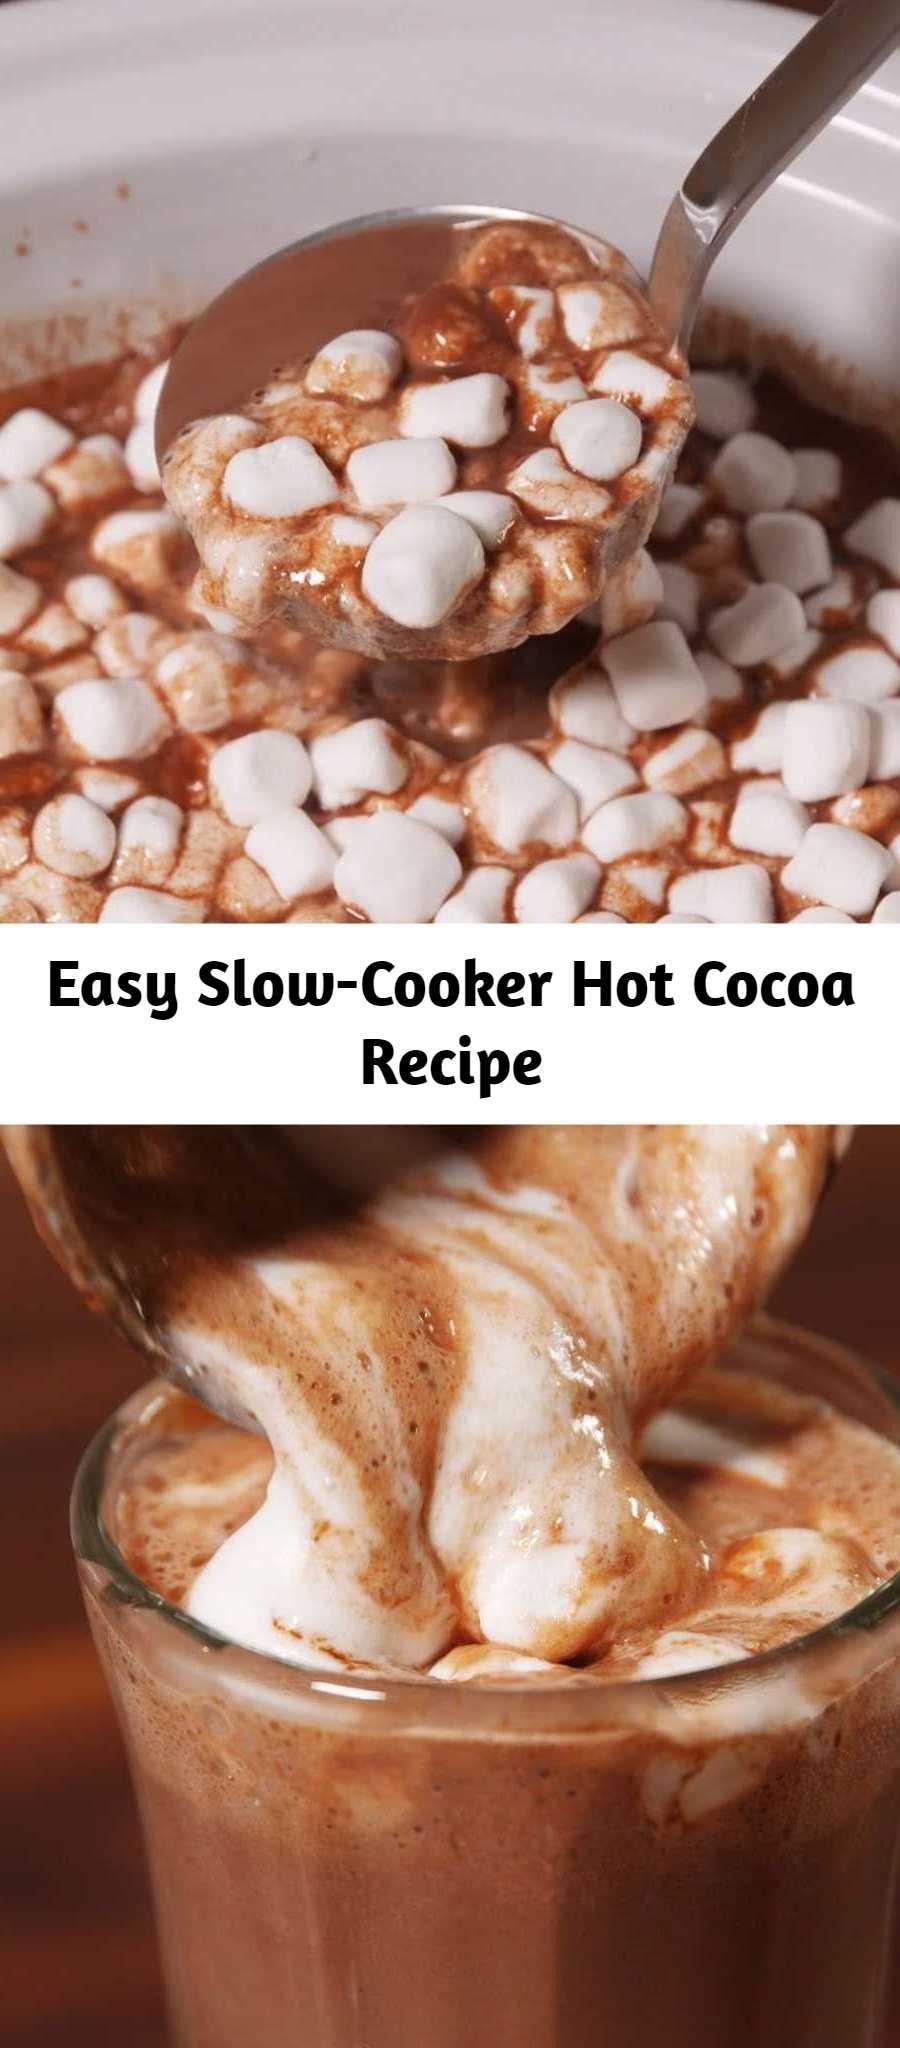 Easy Slow-Cooker Hot Cocoa Recipe - Slow-cooker hot cocoa is the best way to keep your family warm this winter. #easy #recipe #slowcooker #crockpot #family #forkids #bigbatch #hotchocolate #cocoa #chocolate #marshmallows #whippedcream